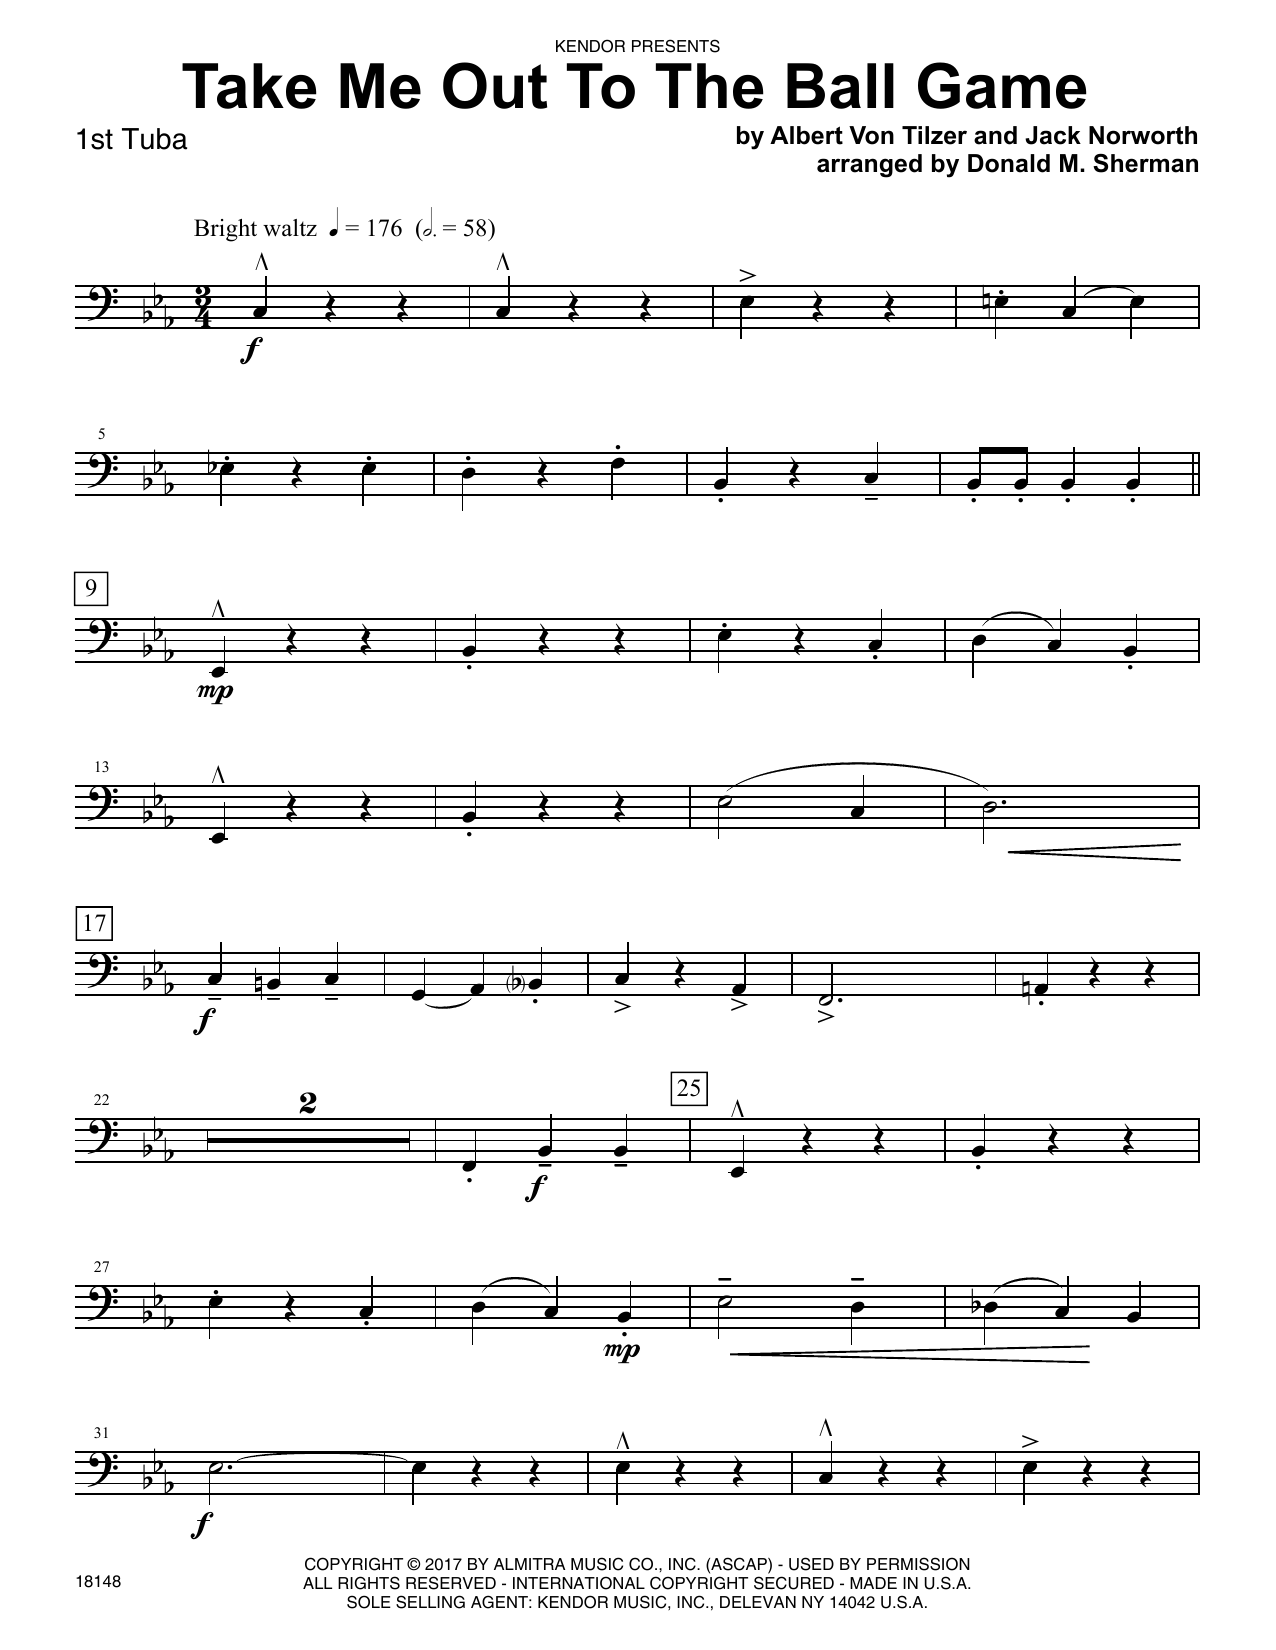 Download Donald M. Sherman Take Me Out To The Ball Game - 1st Tuba Sheet Music